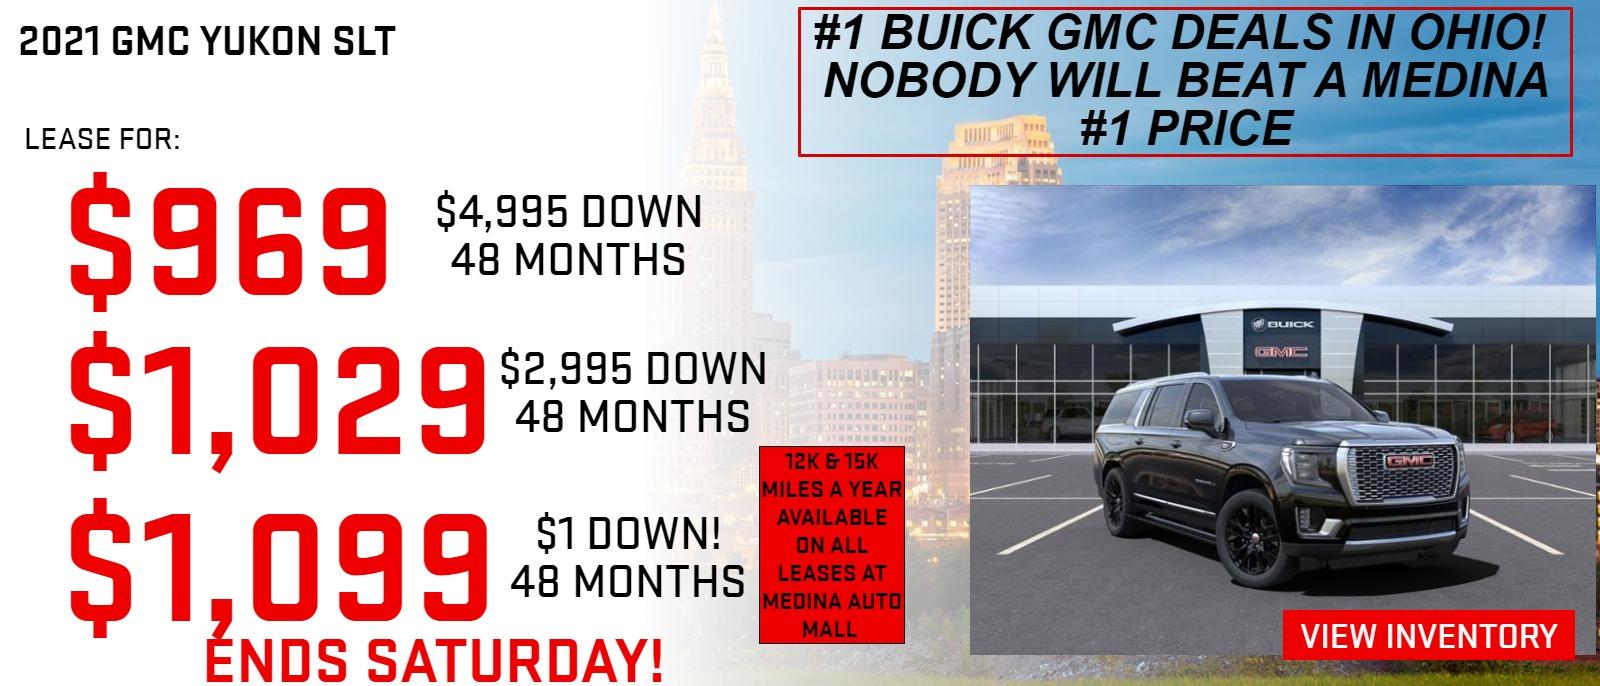 leases-starting-at-264-mo-view-our-specials-here-1-buick-gmc-dealer